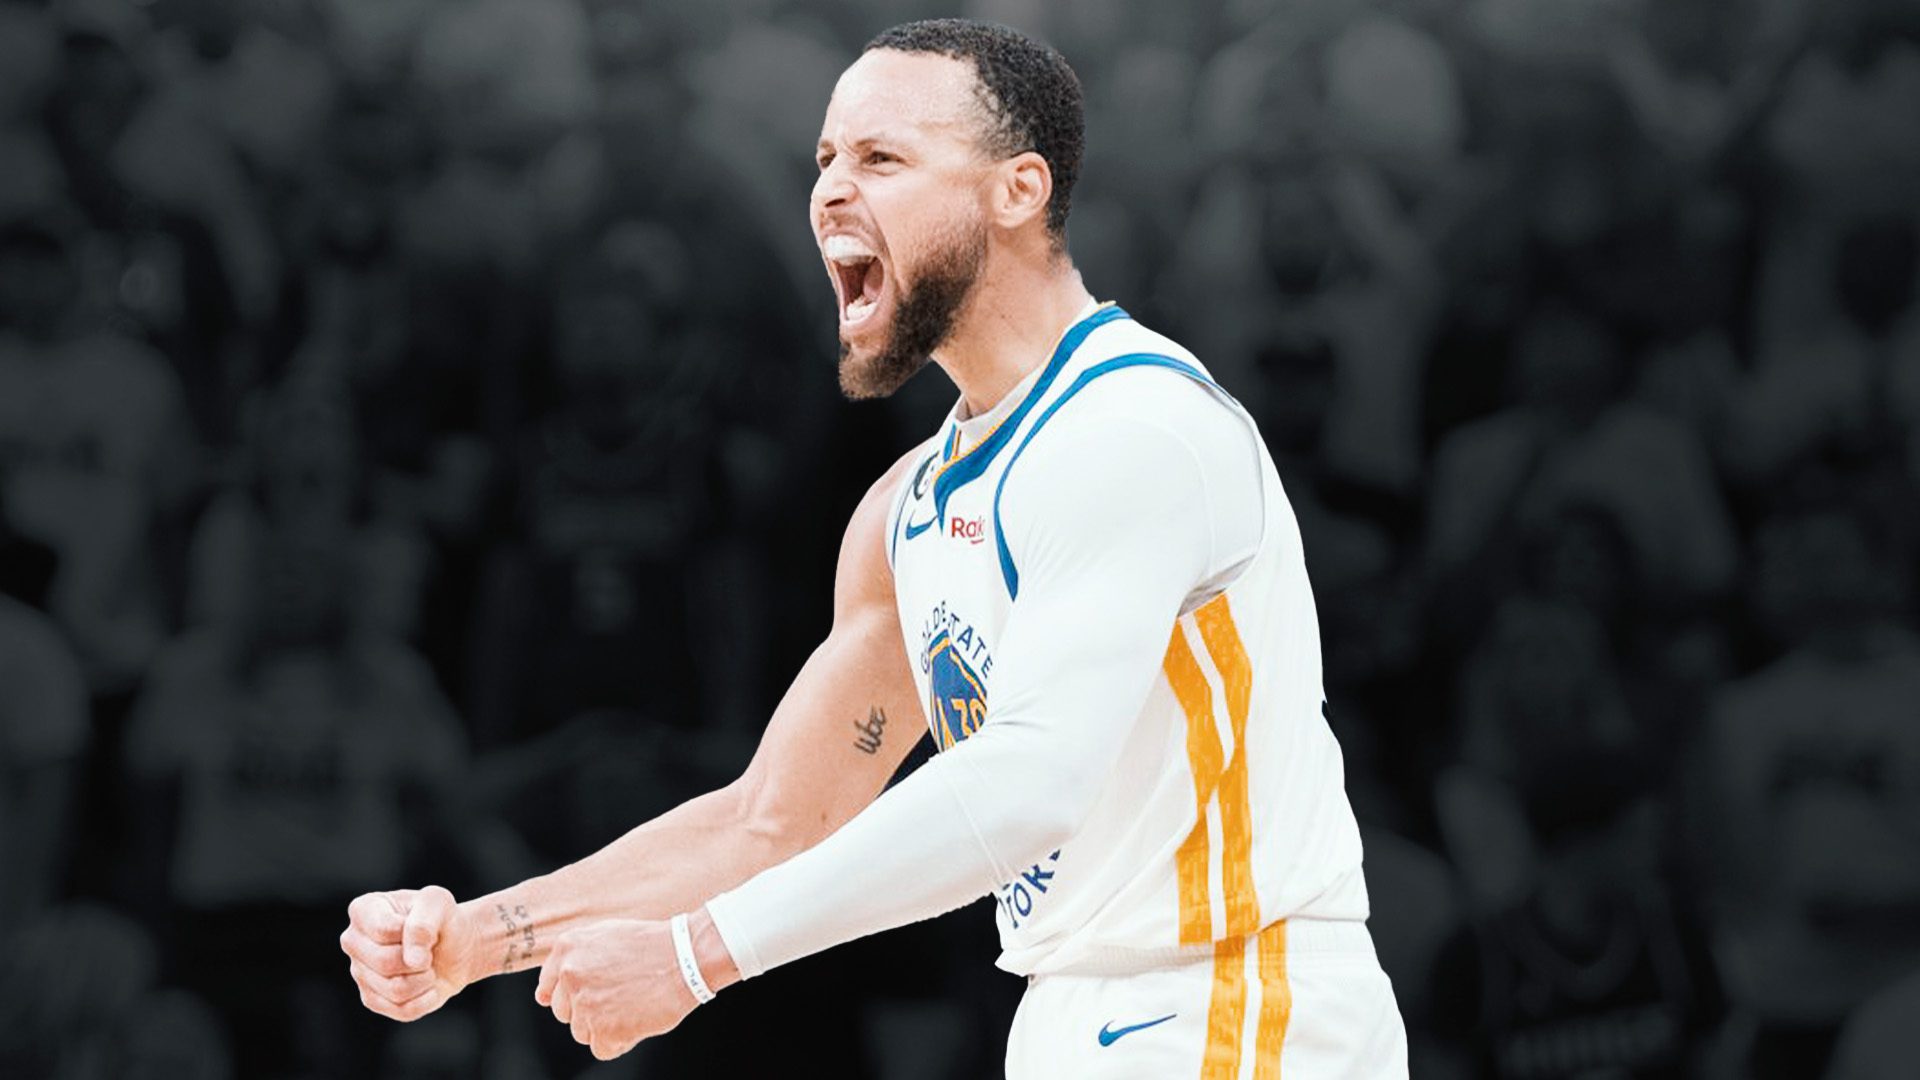 The Crazy Story Behind Steph Curry’s Game 7 Performance